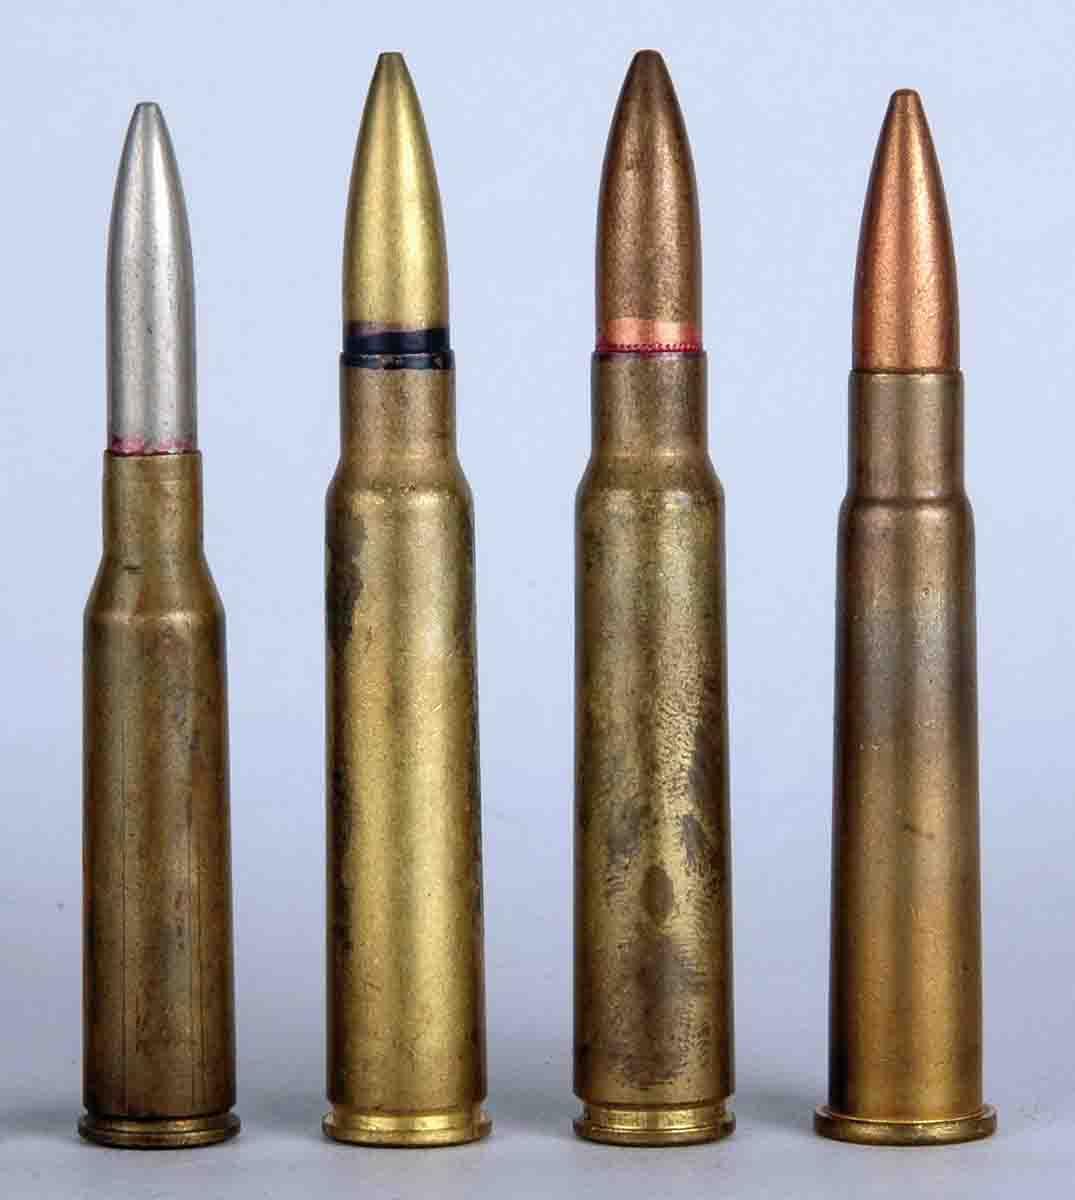 Original IJA military rounds include (left to right): the 6.5x50mm semi-rimmed, 7.7x58mm semi-rimmed, 7.7x58mm rimless and the 7.7x56mm rimmed that was used only by the Japanese Navy in Lewis Light Machine Guns.